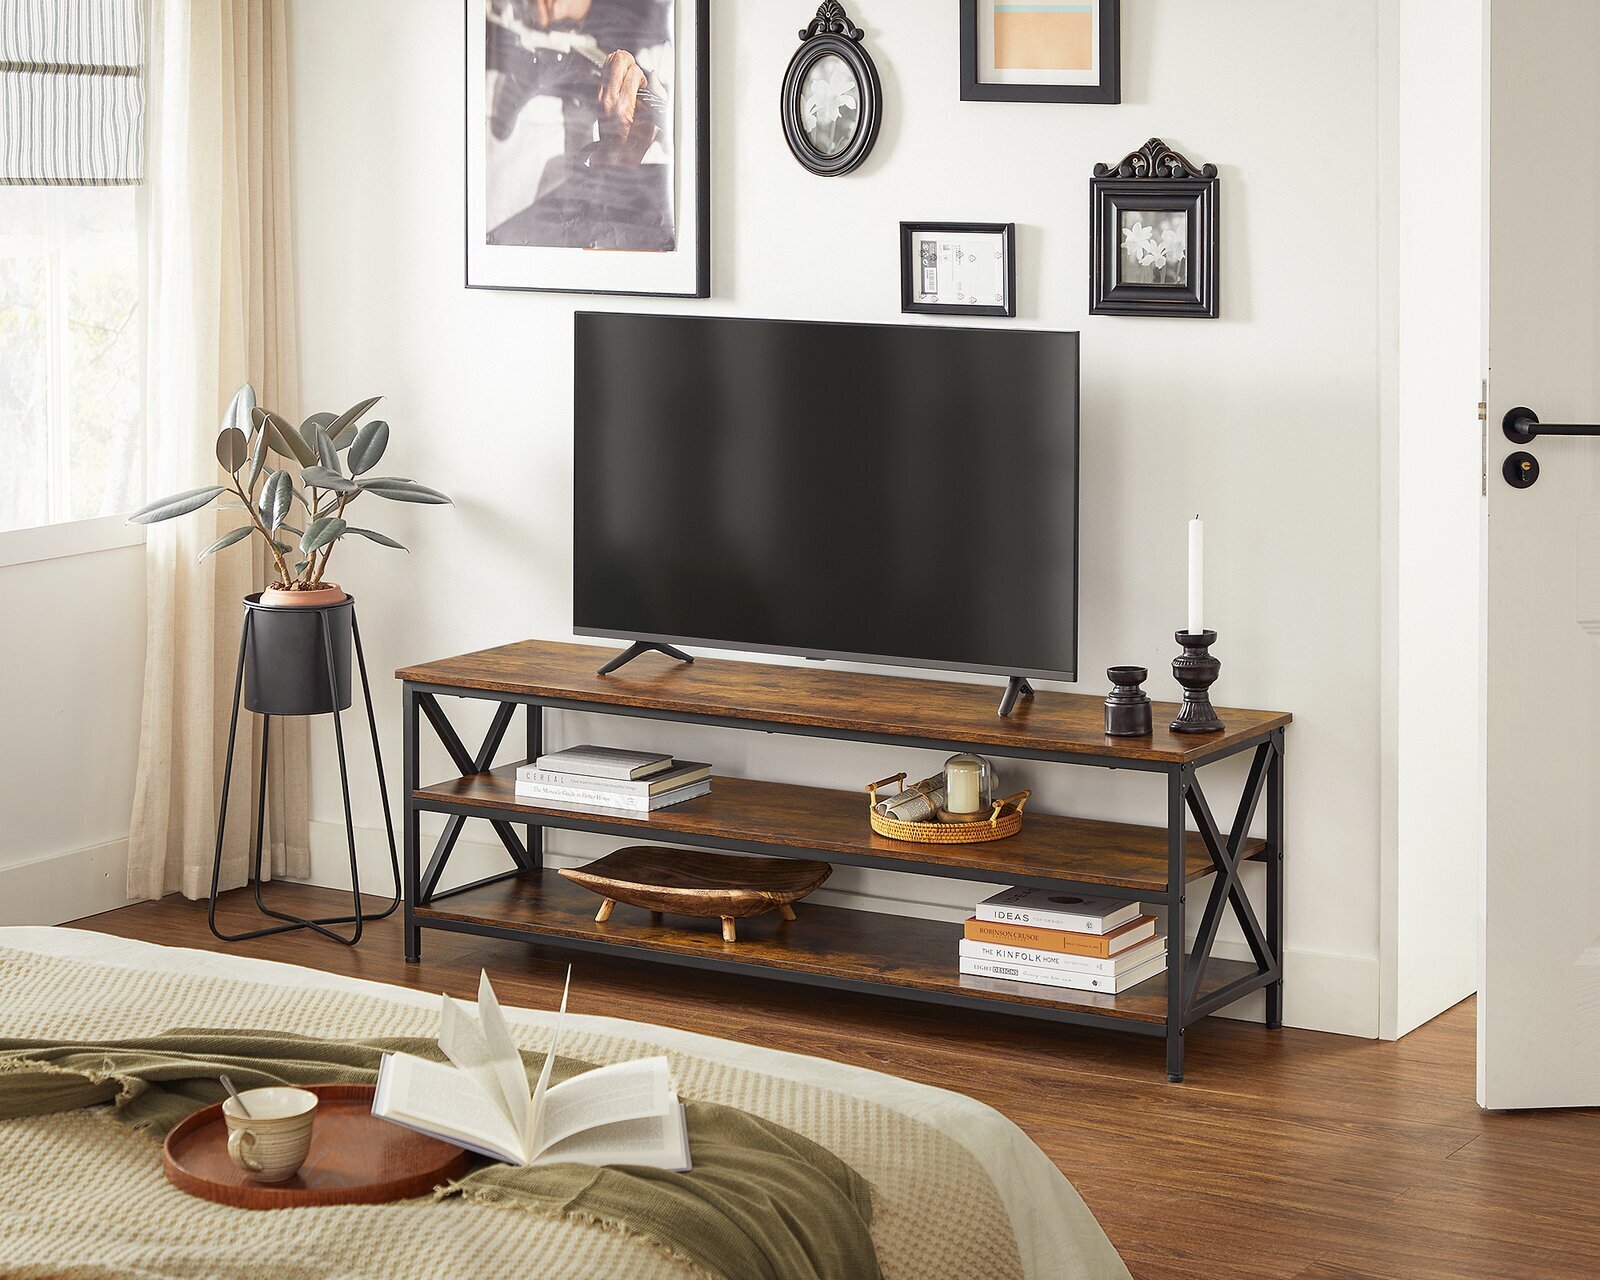 Large Sideboard Style Furniture for Speakers or TV